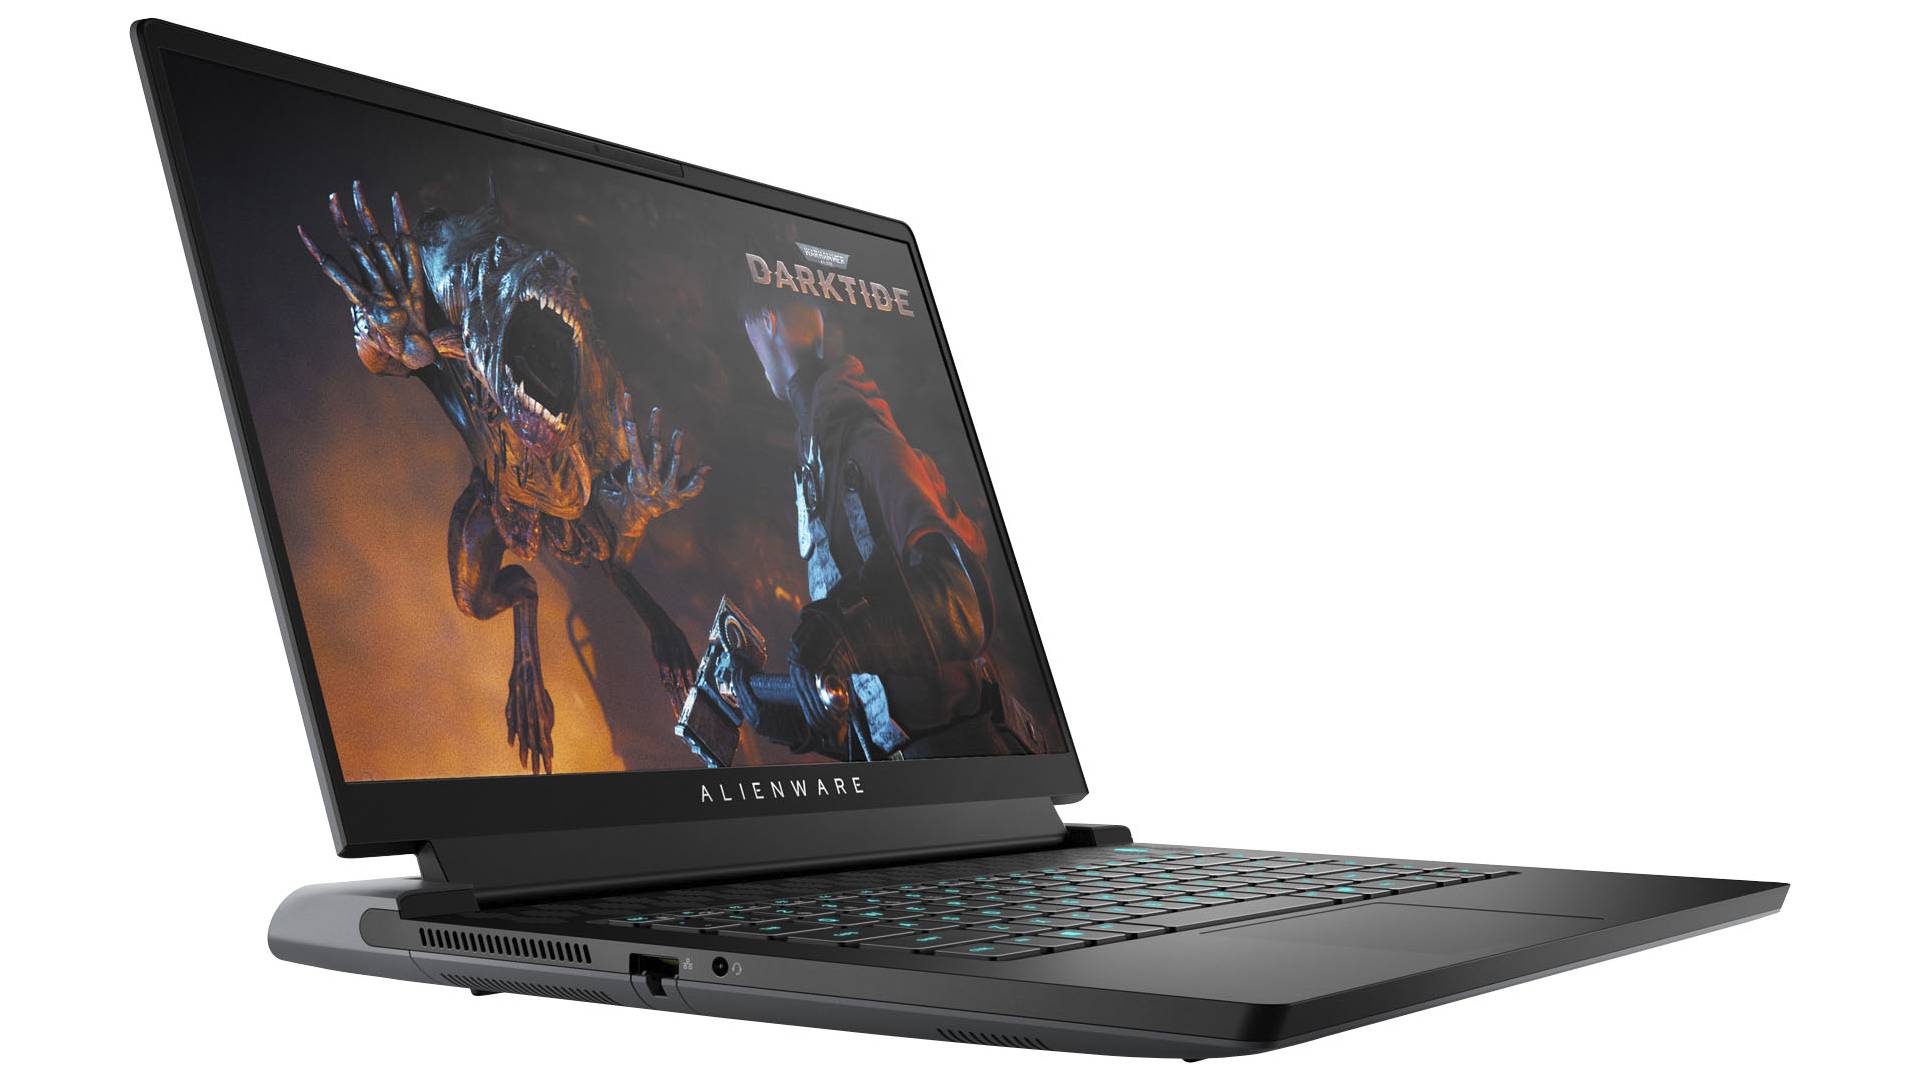 Grab $400 off Dell’s Alienware M15 RTX 3070 gaming laptop at Best Buy